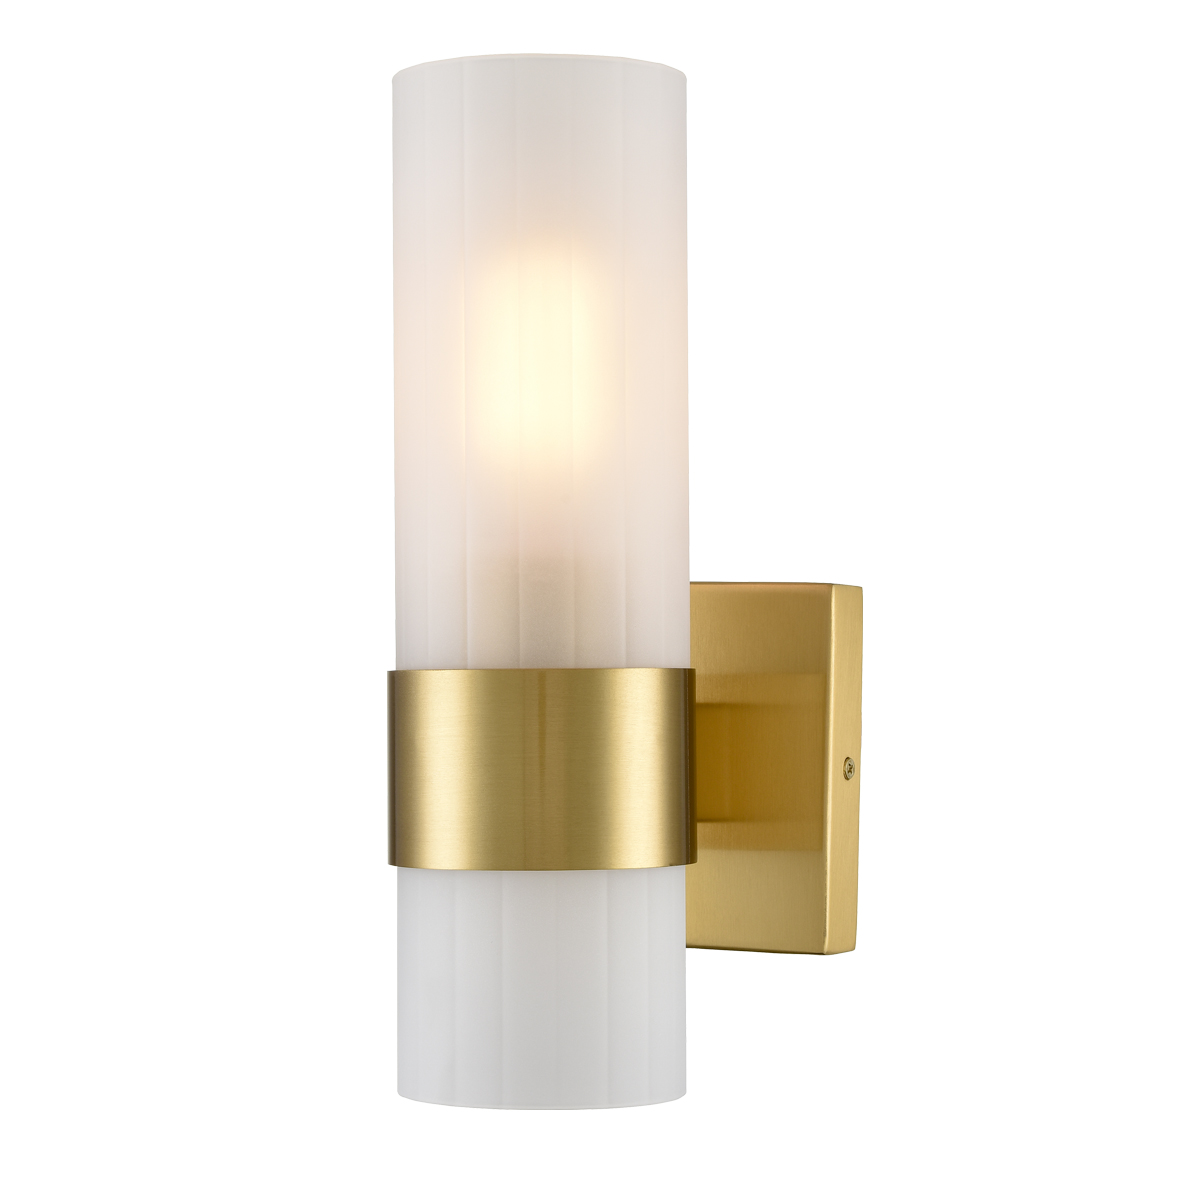 Modern Gold with Frosted Glass Cylinder Wall Sconce 1-Light Bathroom Bedroom Vanity Lights Fixture Over Mirror